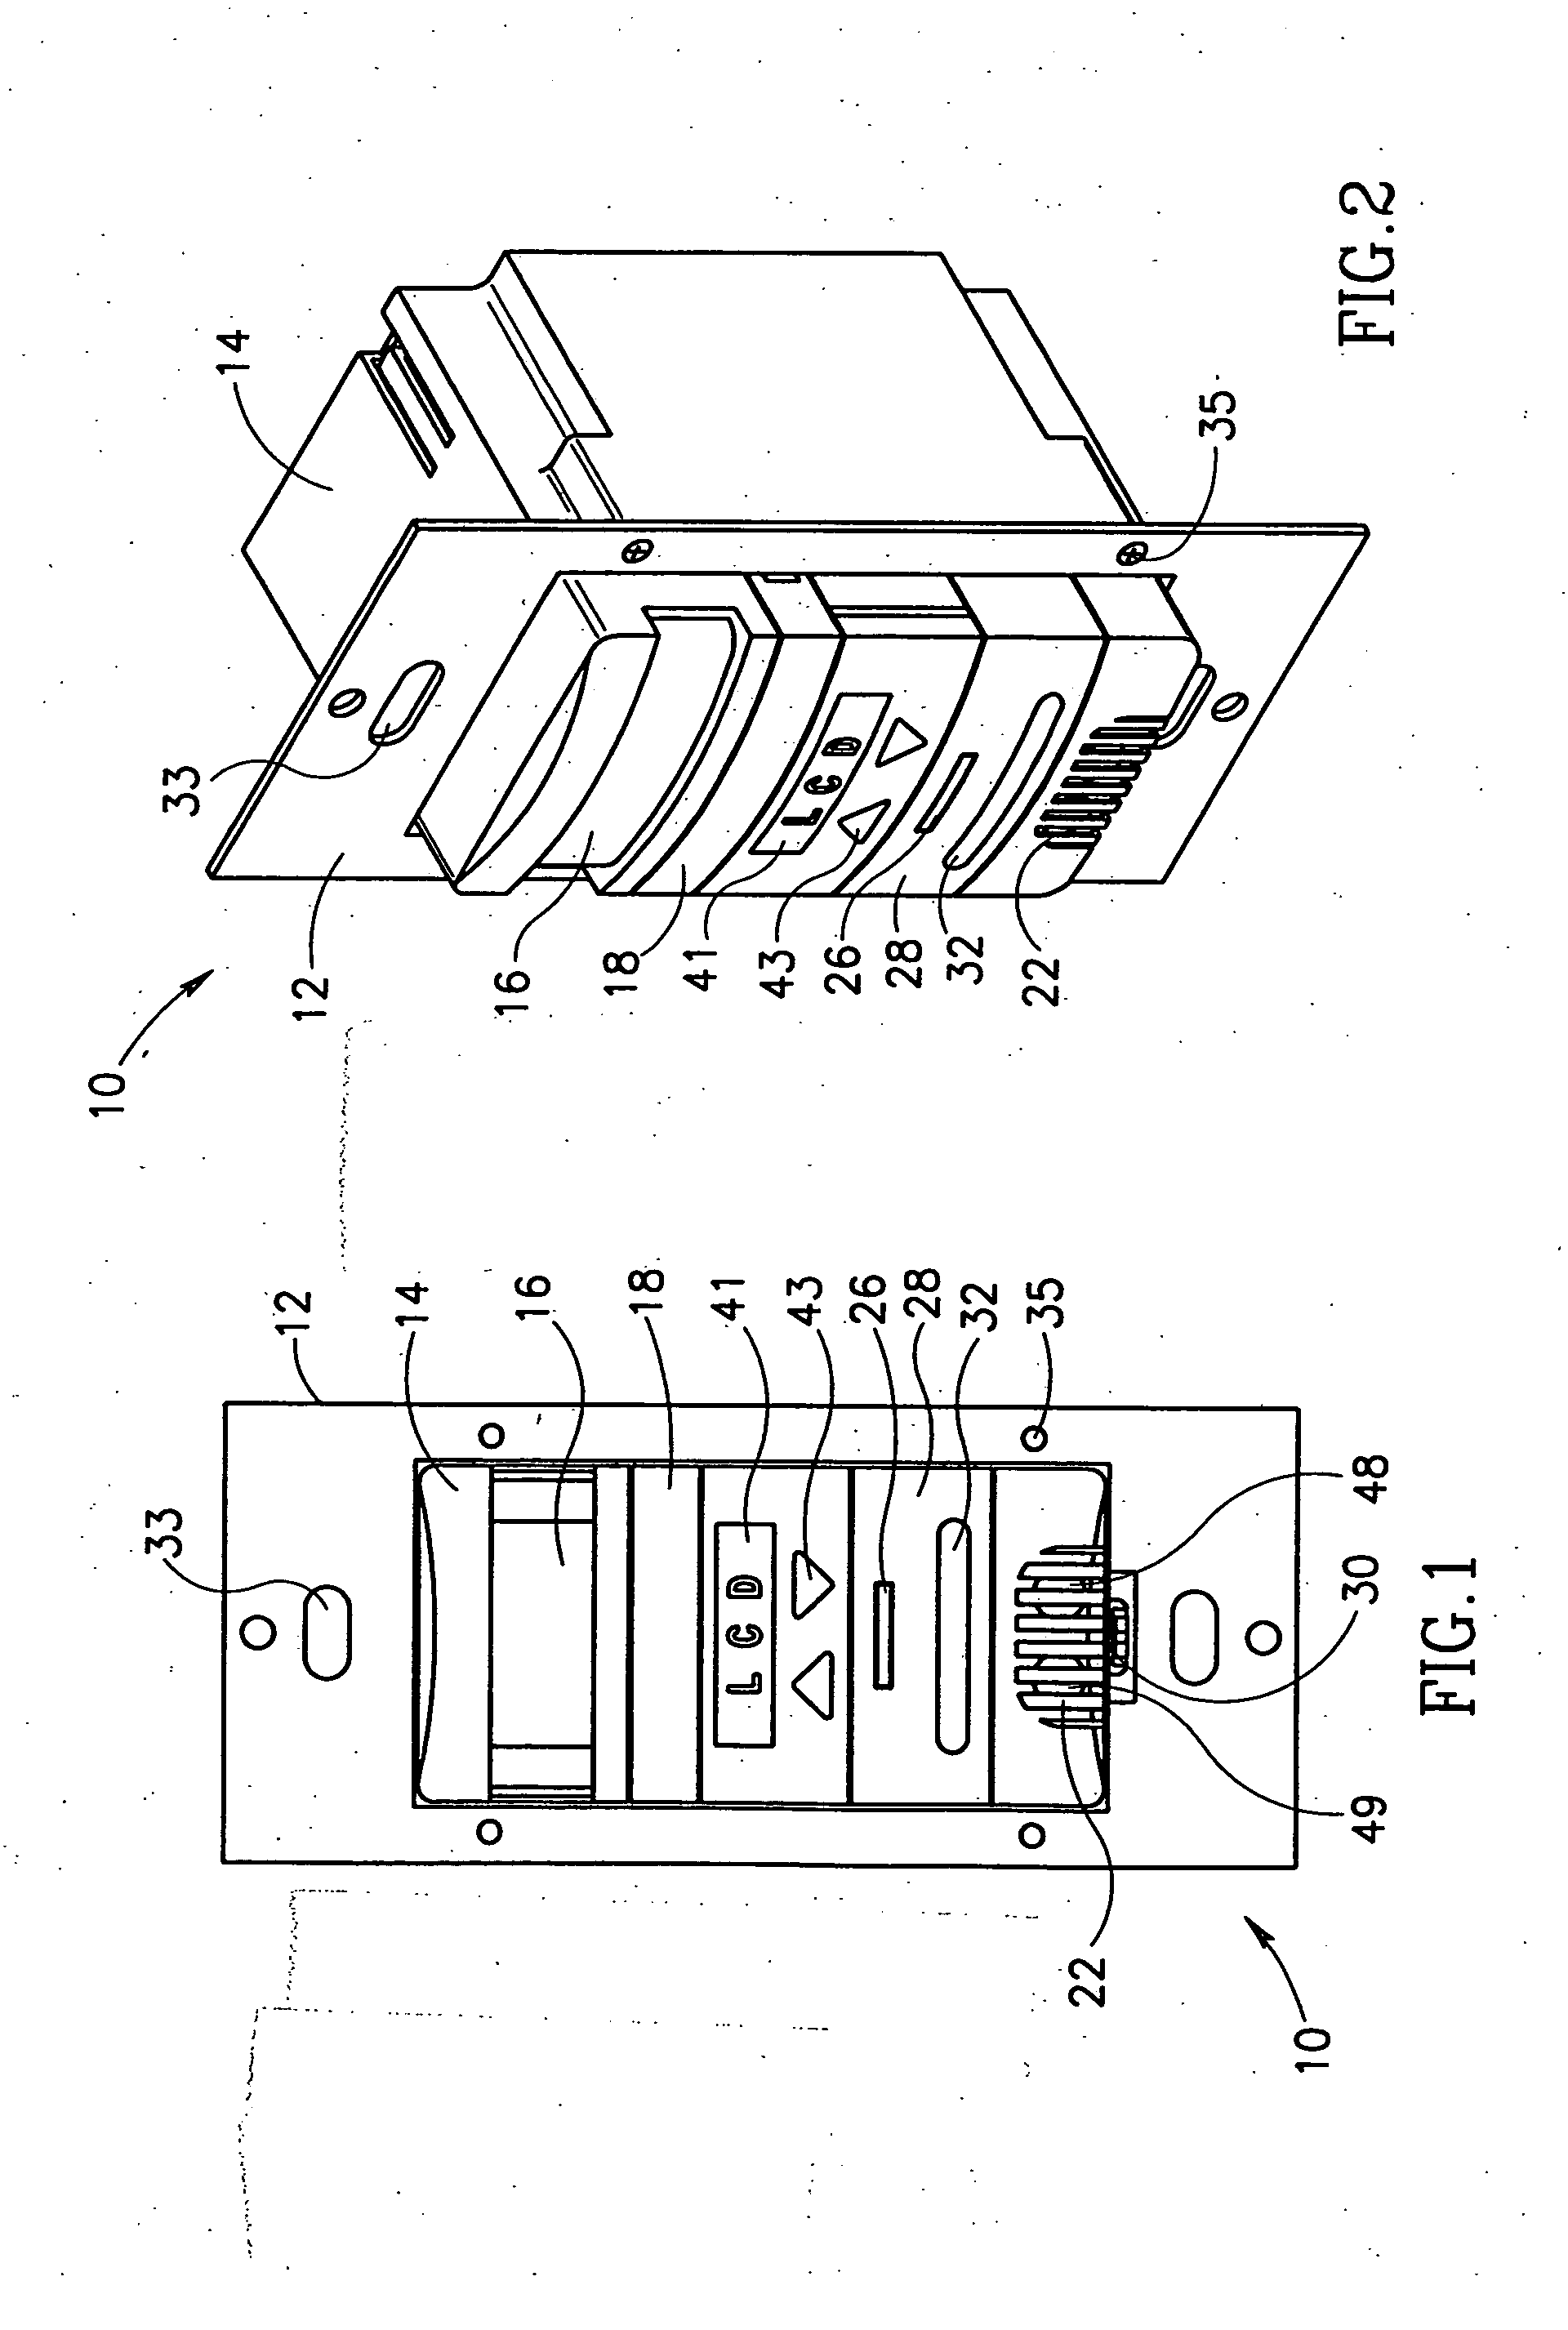 Network based multiple sensor and control device with temperature sensing and control